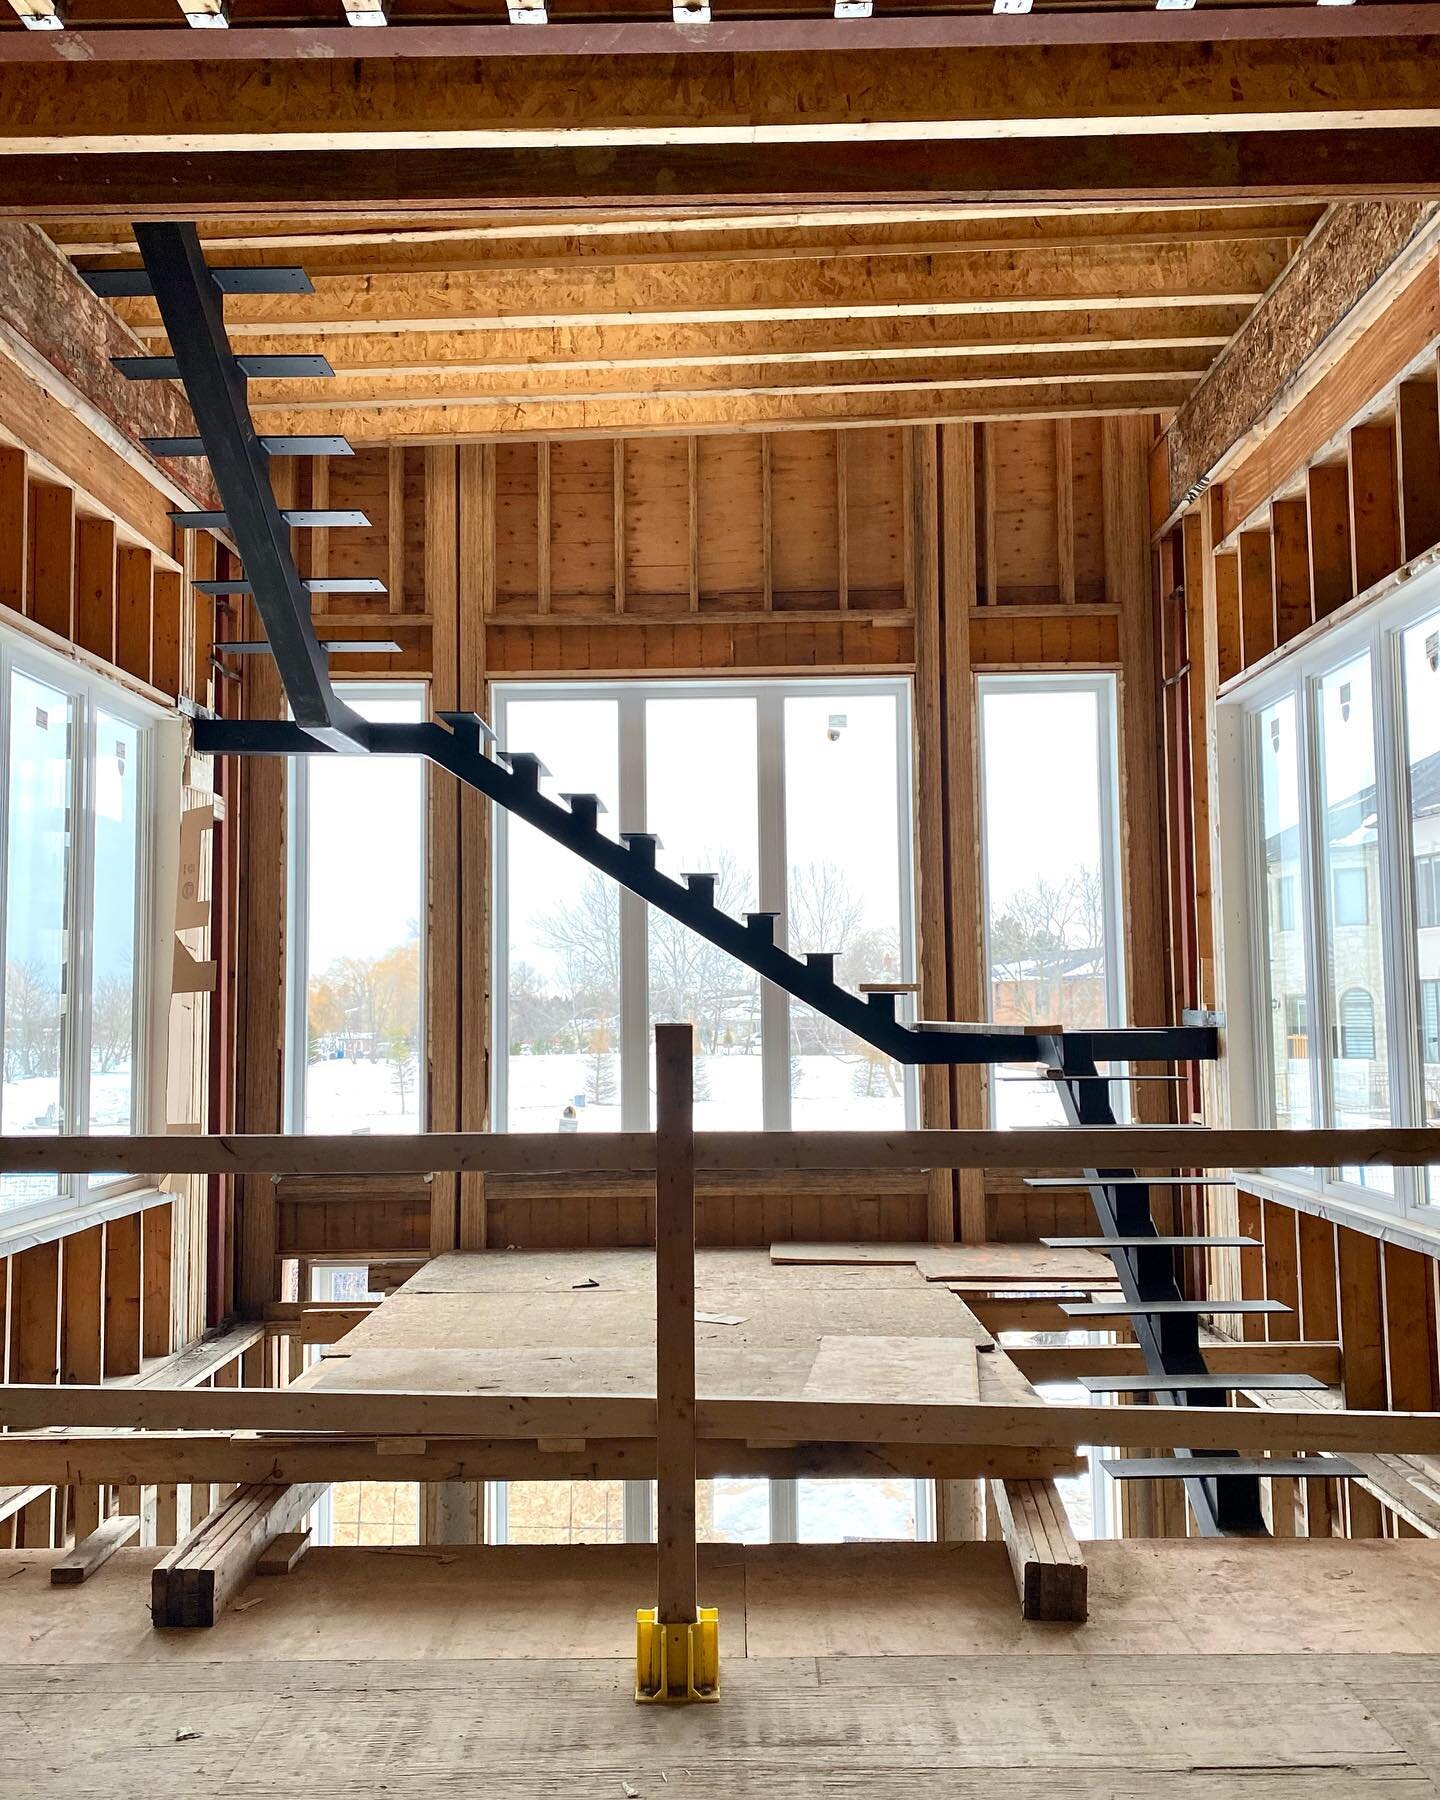 The Primary #Stairwell at One of Our Projects! Steel Mono Beam Stairs with (soon-to-be) White Oak Treads! 
----------------------------------⁠⁠⠀⠀ 
Interested in building your dream home? Contact us! 
☎️: (416) 816-4313 
✉️ info@prestigecustomhome.com